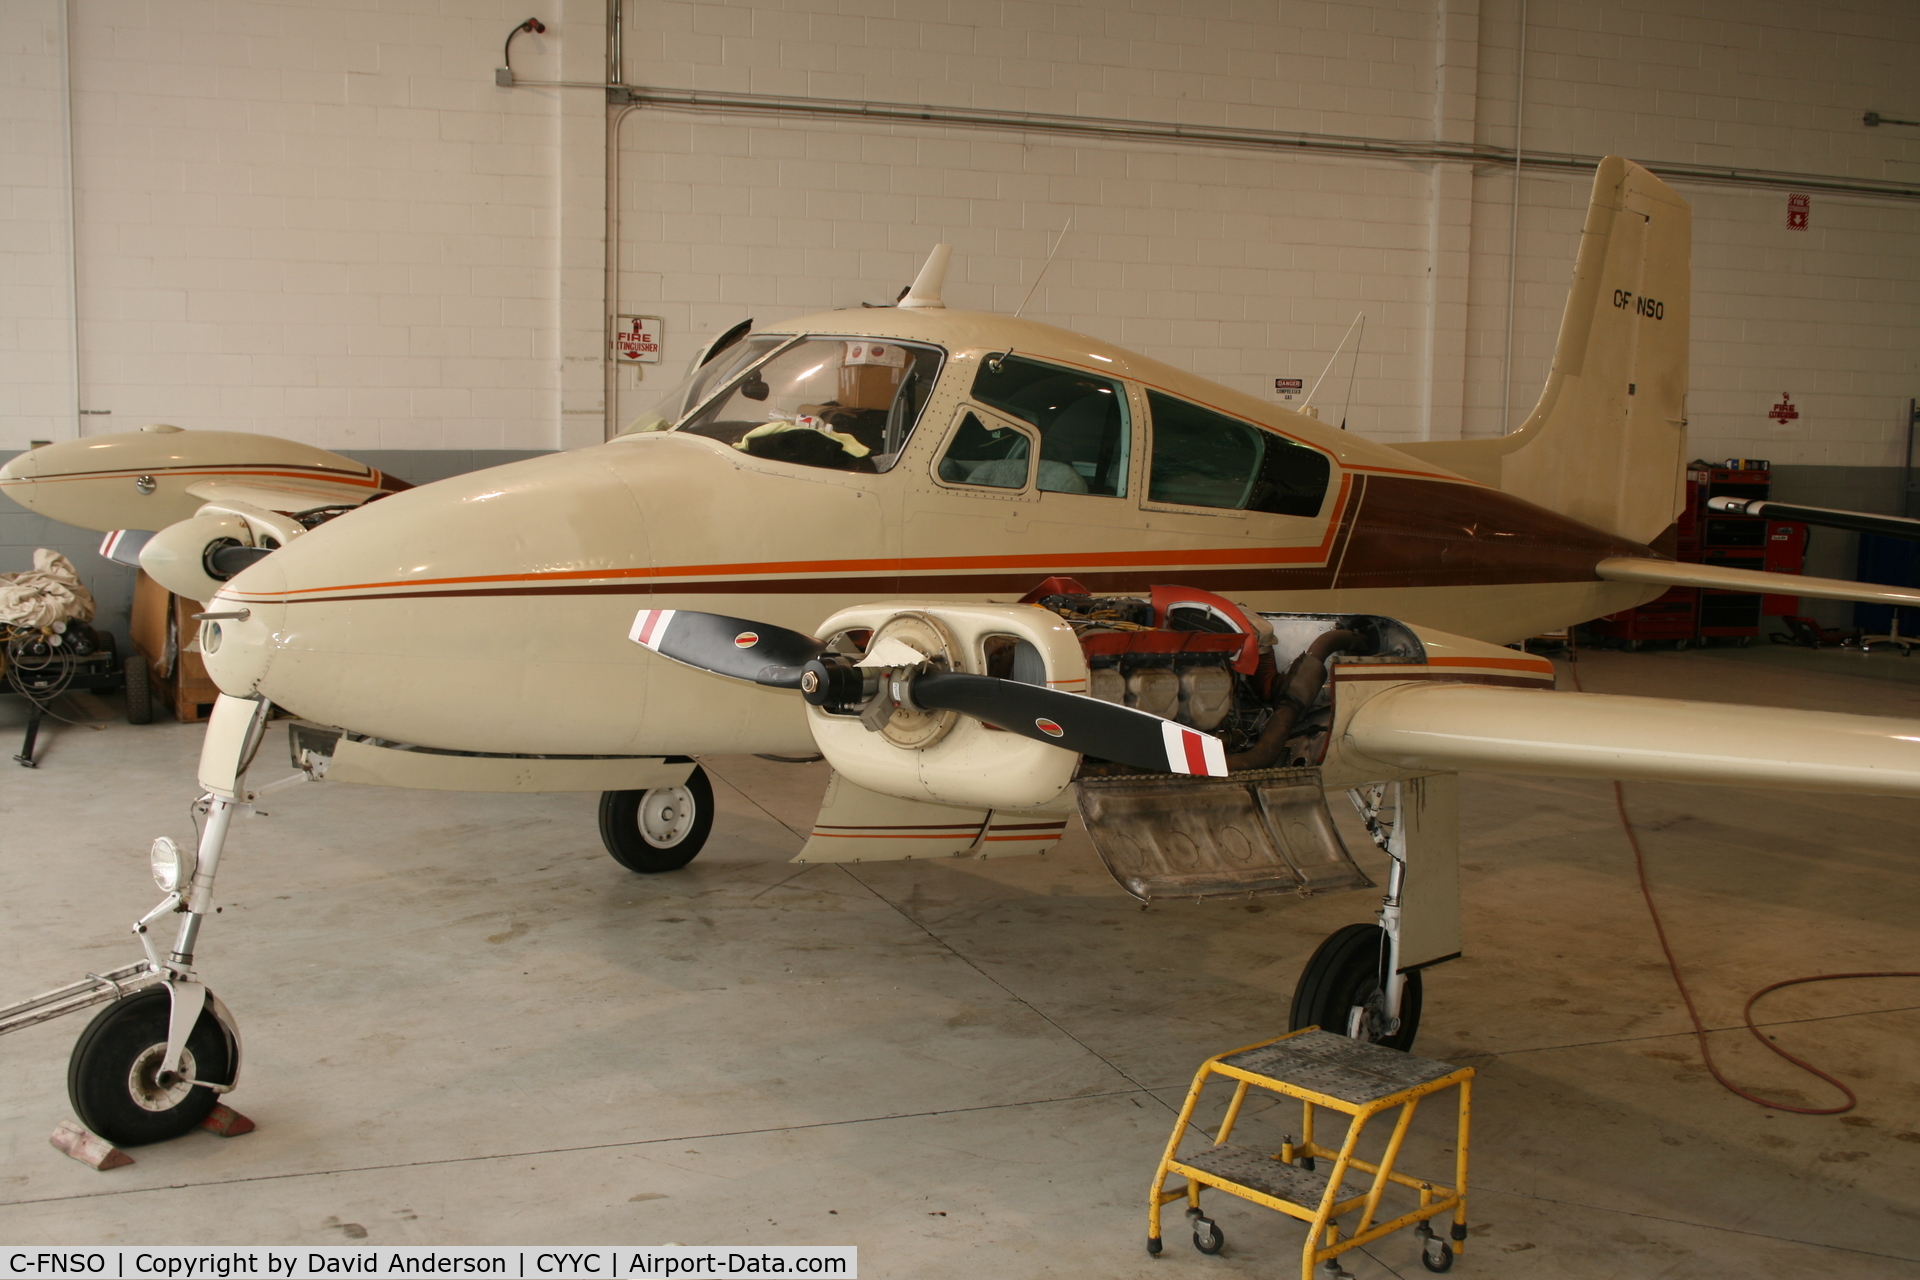 C-FNSO, 1957 Cessna 310 C/N 35535, Undergoing maintenance at YYC